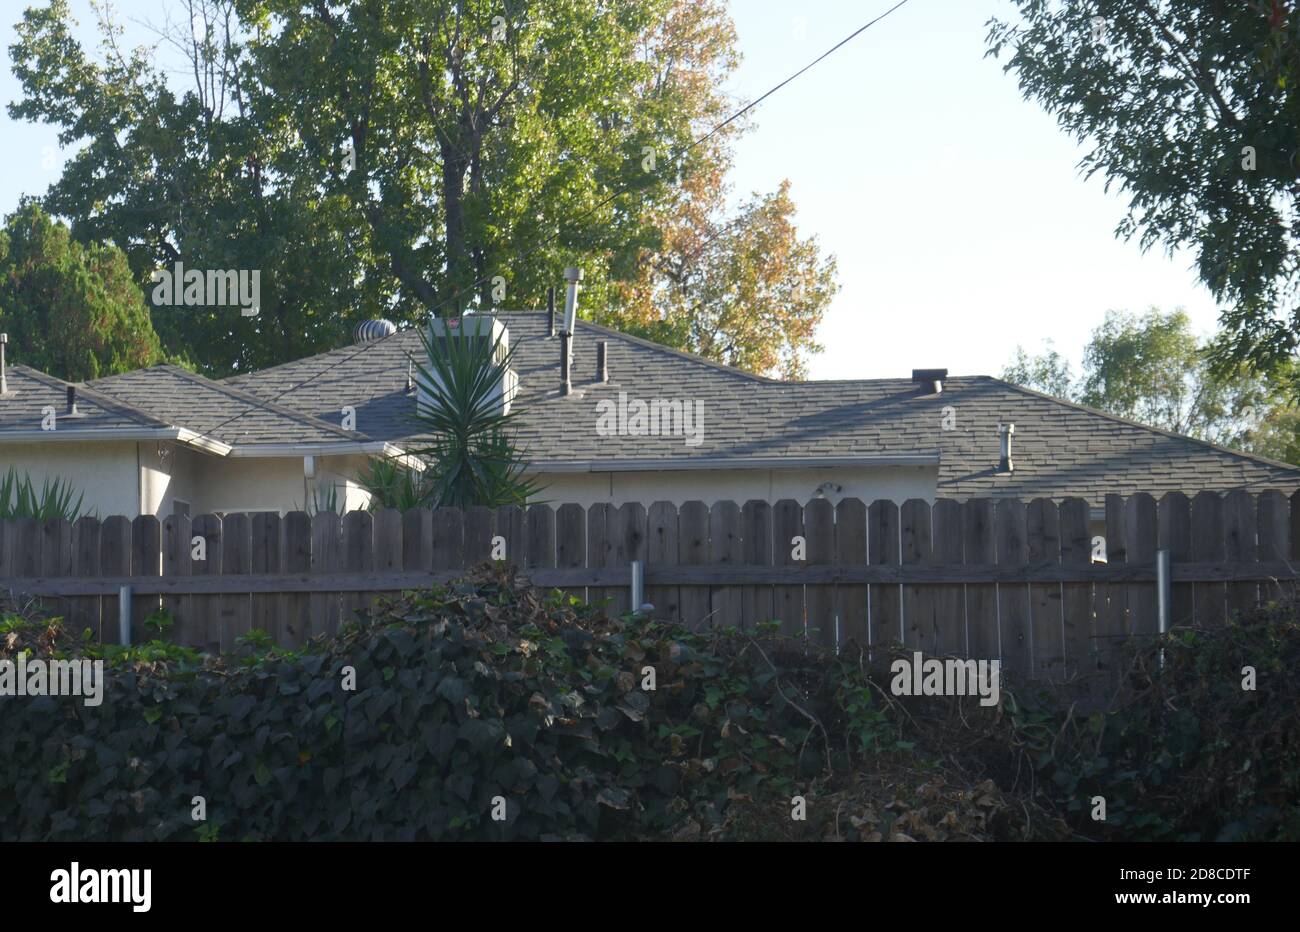 Encino, California, USA 28th October 2020 A general view of atmosphere of actor Steve McQueen's former home at 17432 W. Oxnard Street on October 28, 2020 in Encino, California, USA. Photo by Barry King/Alamy Stock Photo Stock Photo